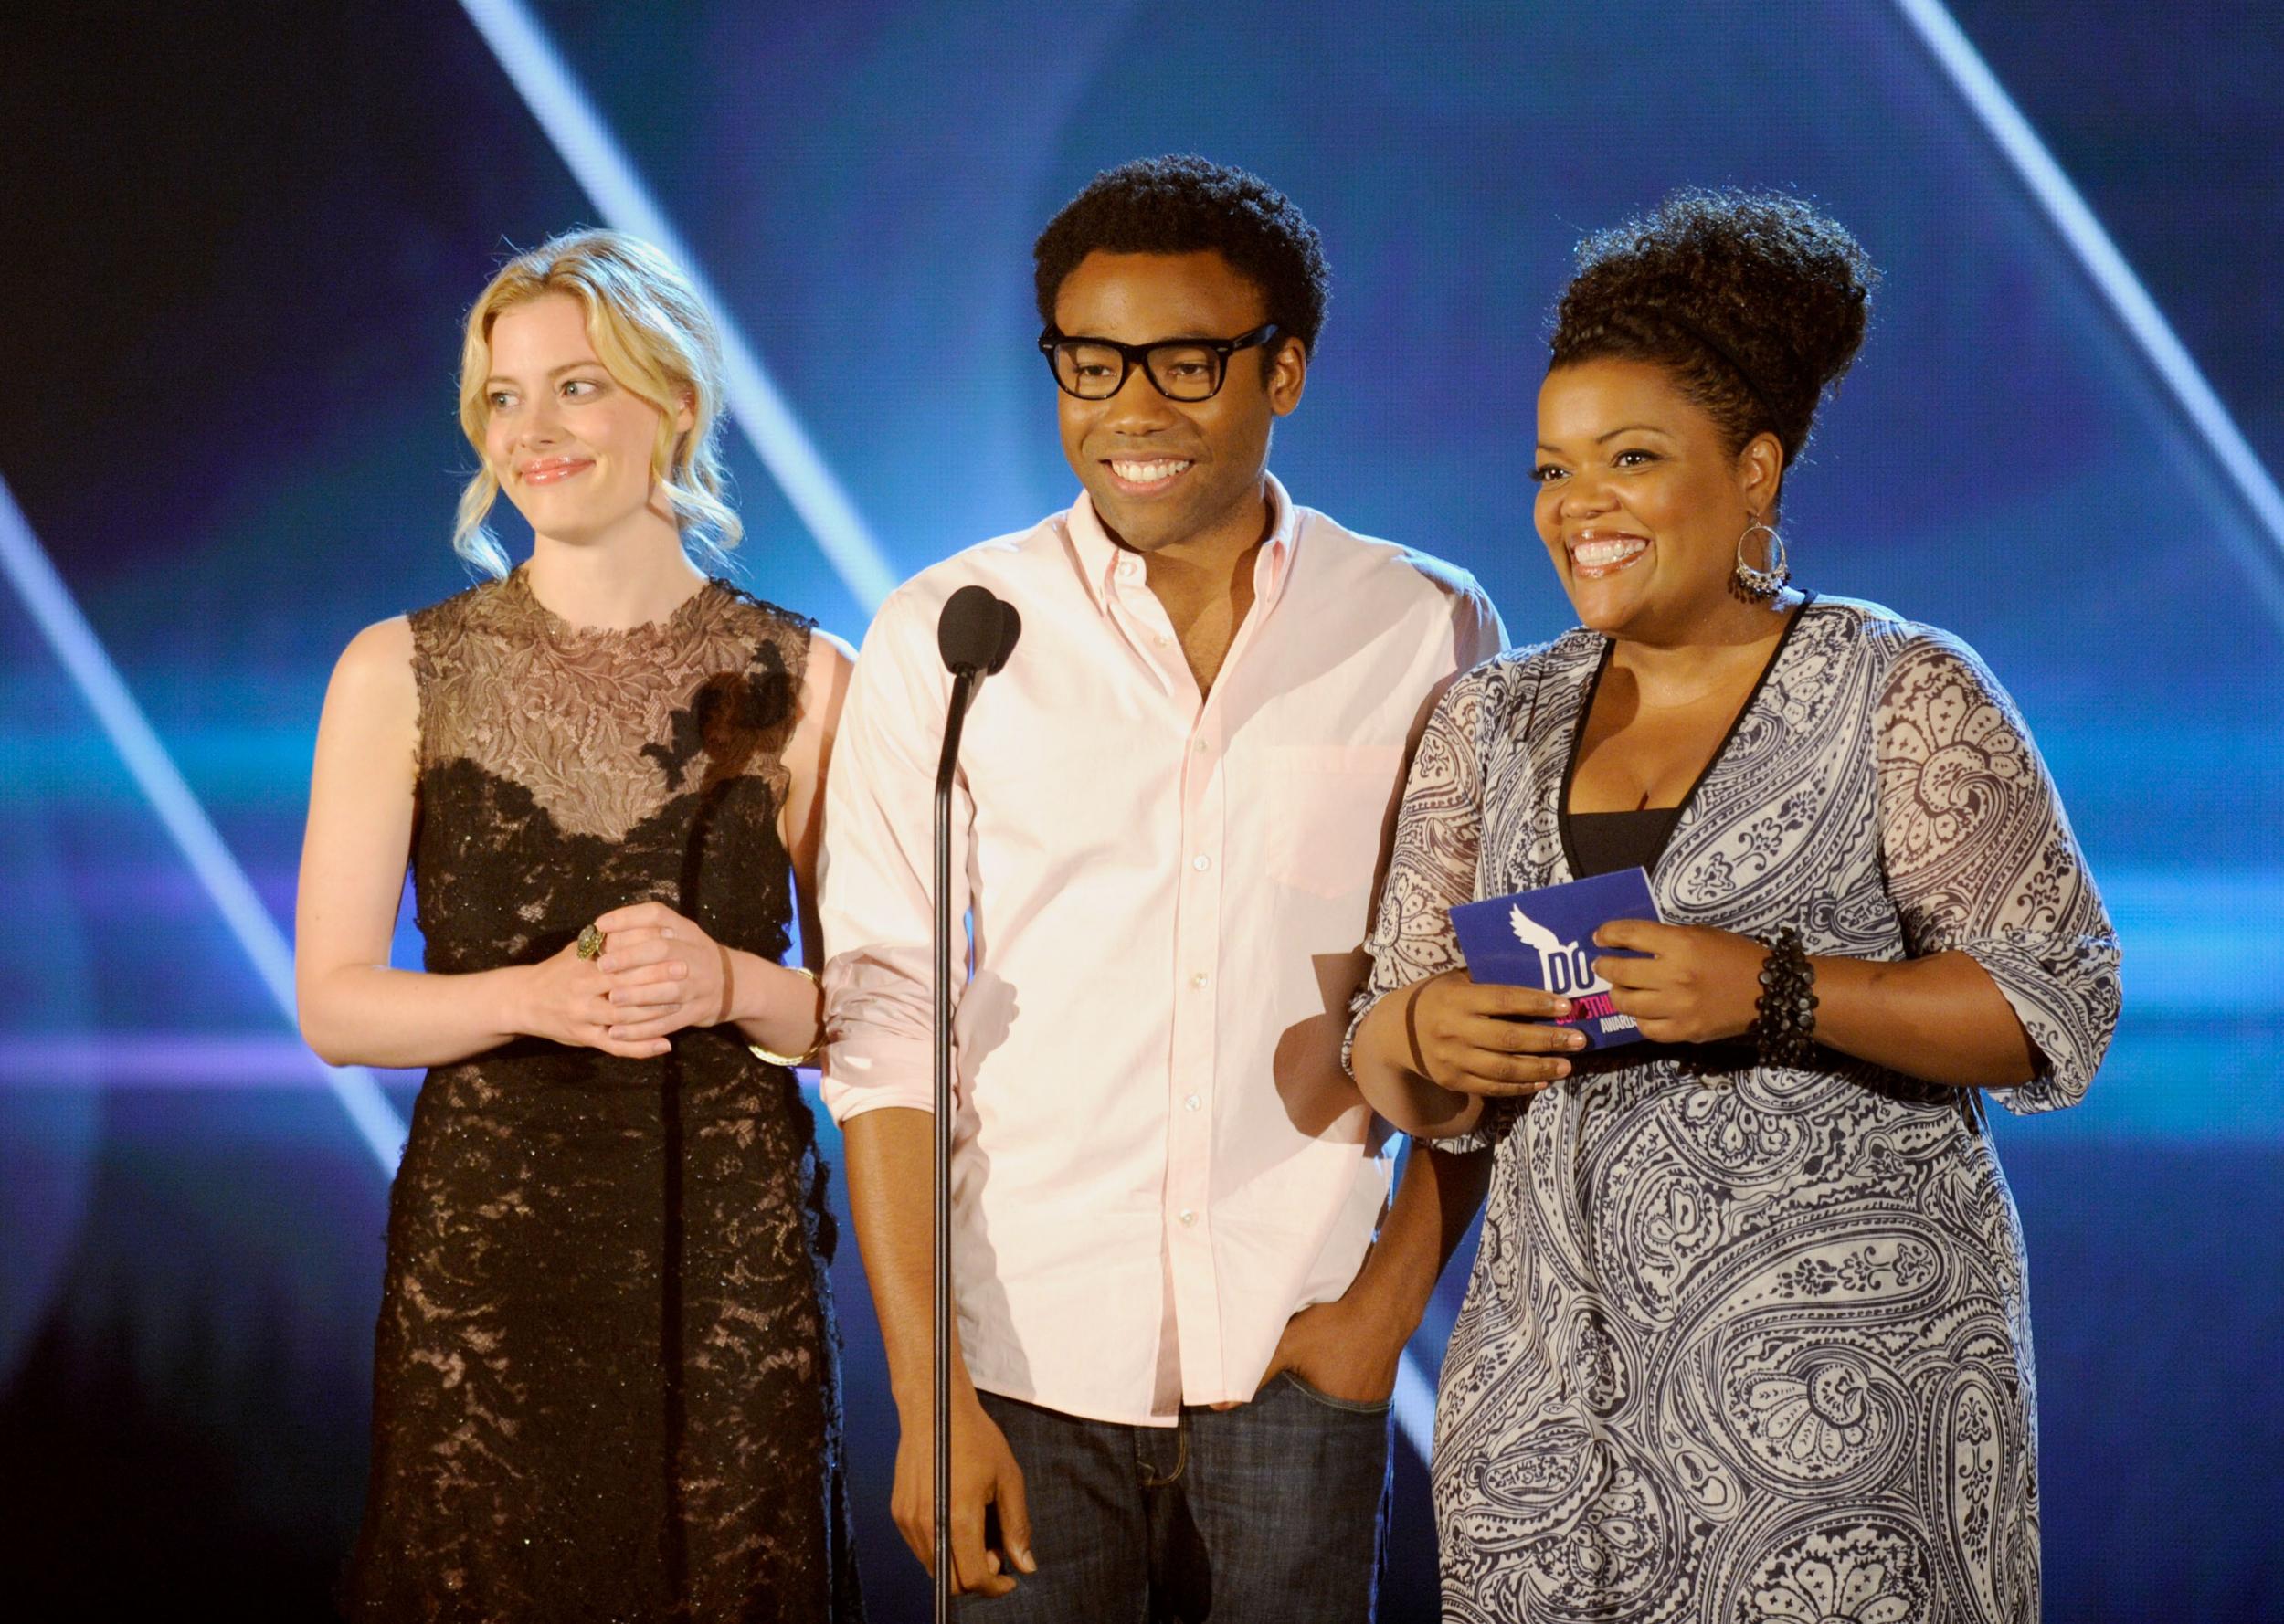 Gillian Jacobs, Donald Glover and Yvette Nicole Brown speak onstage at the 2010 VH1 Do Something! Awards